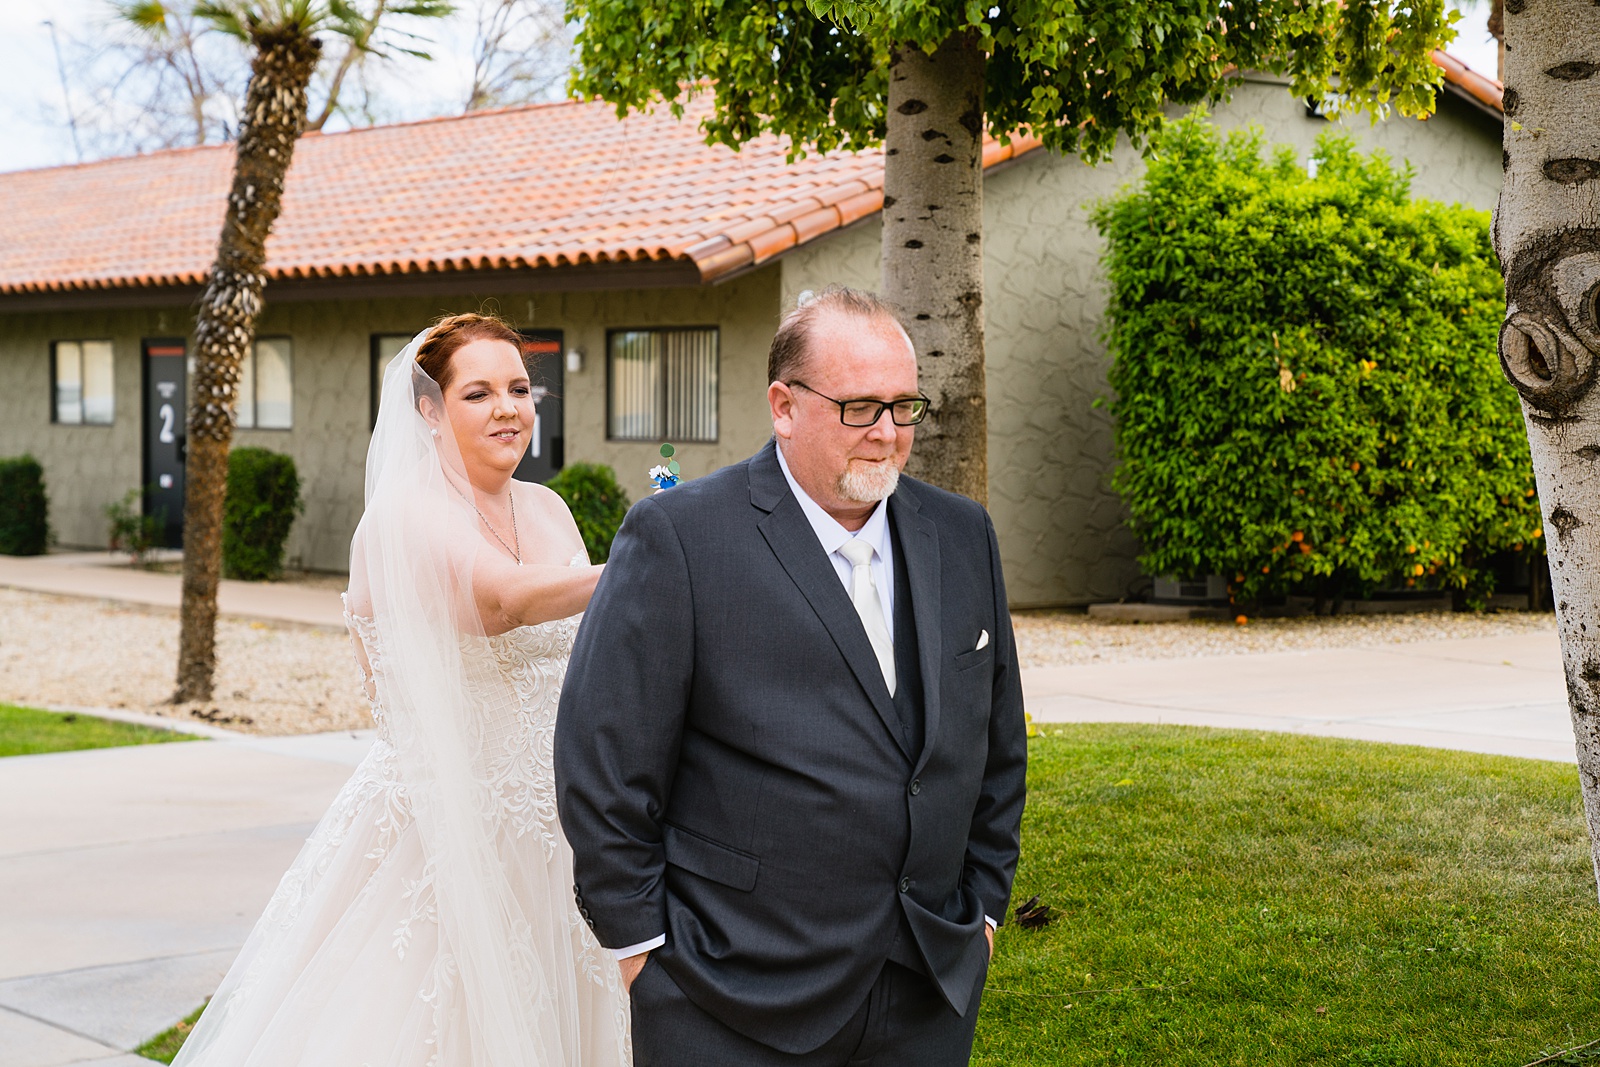 Newlyweds's first look at Sun Valley Church by Phoenix wedding photographer PMA Photography.